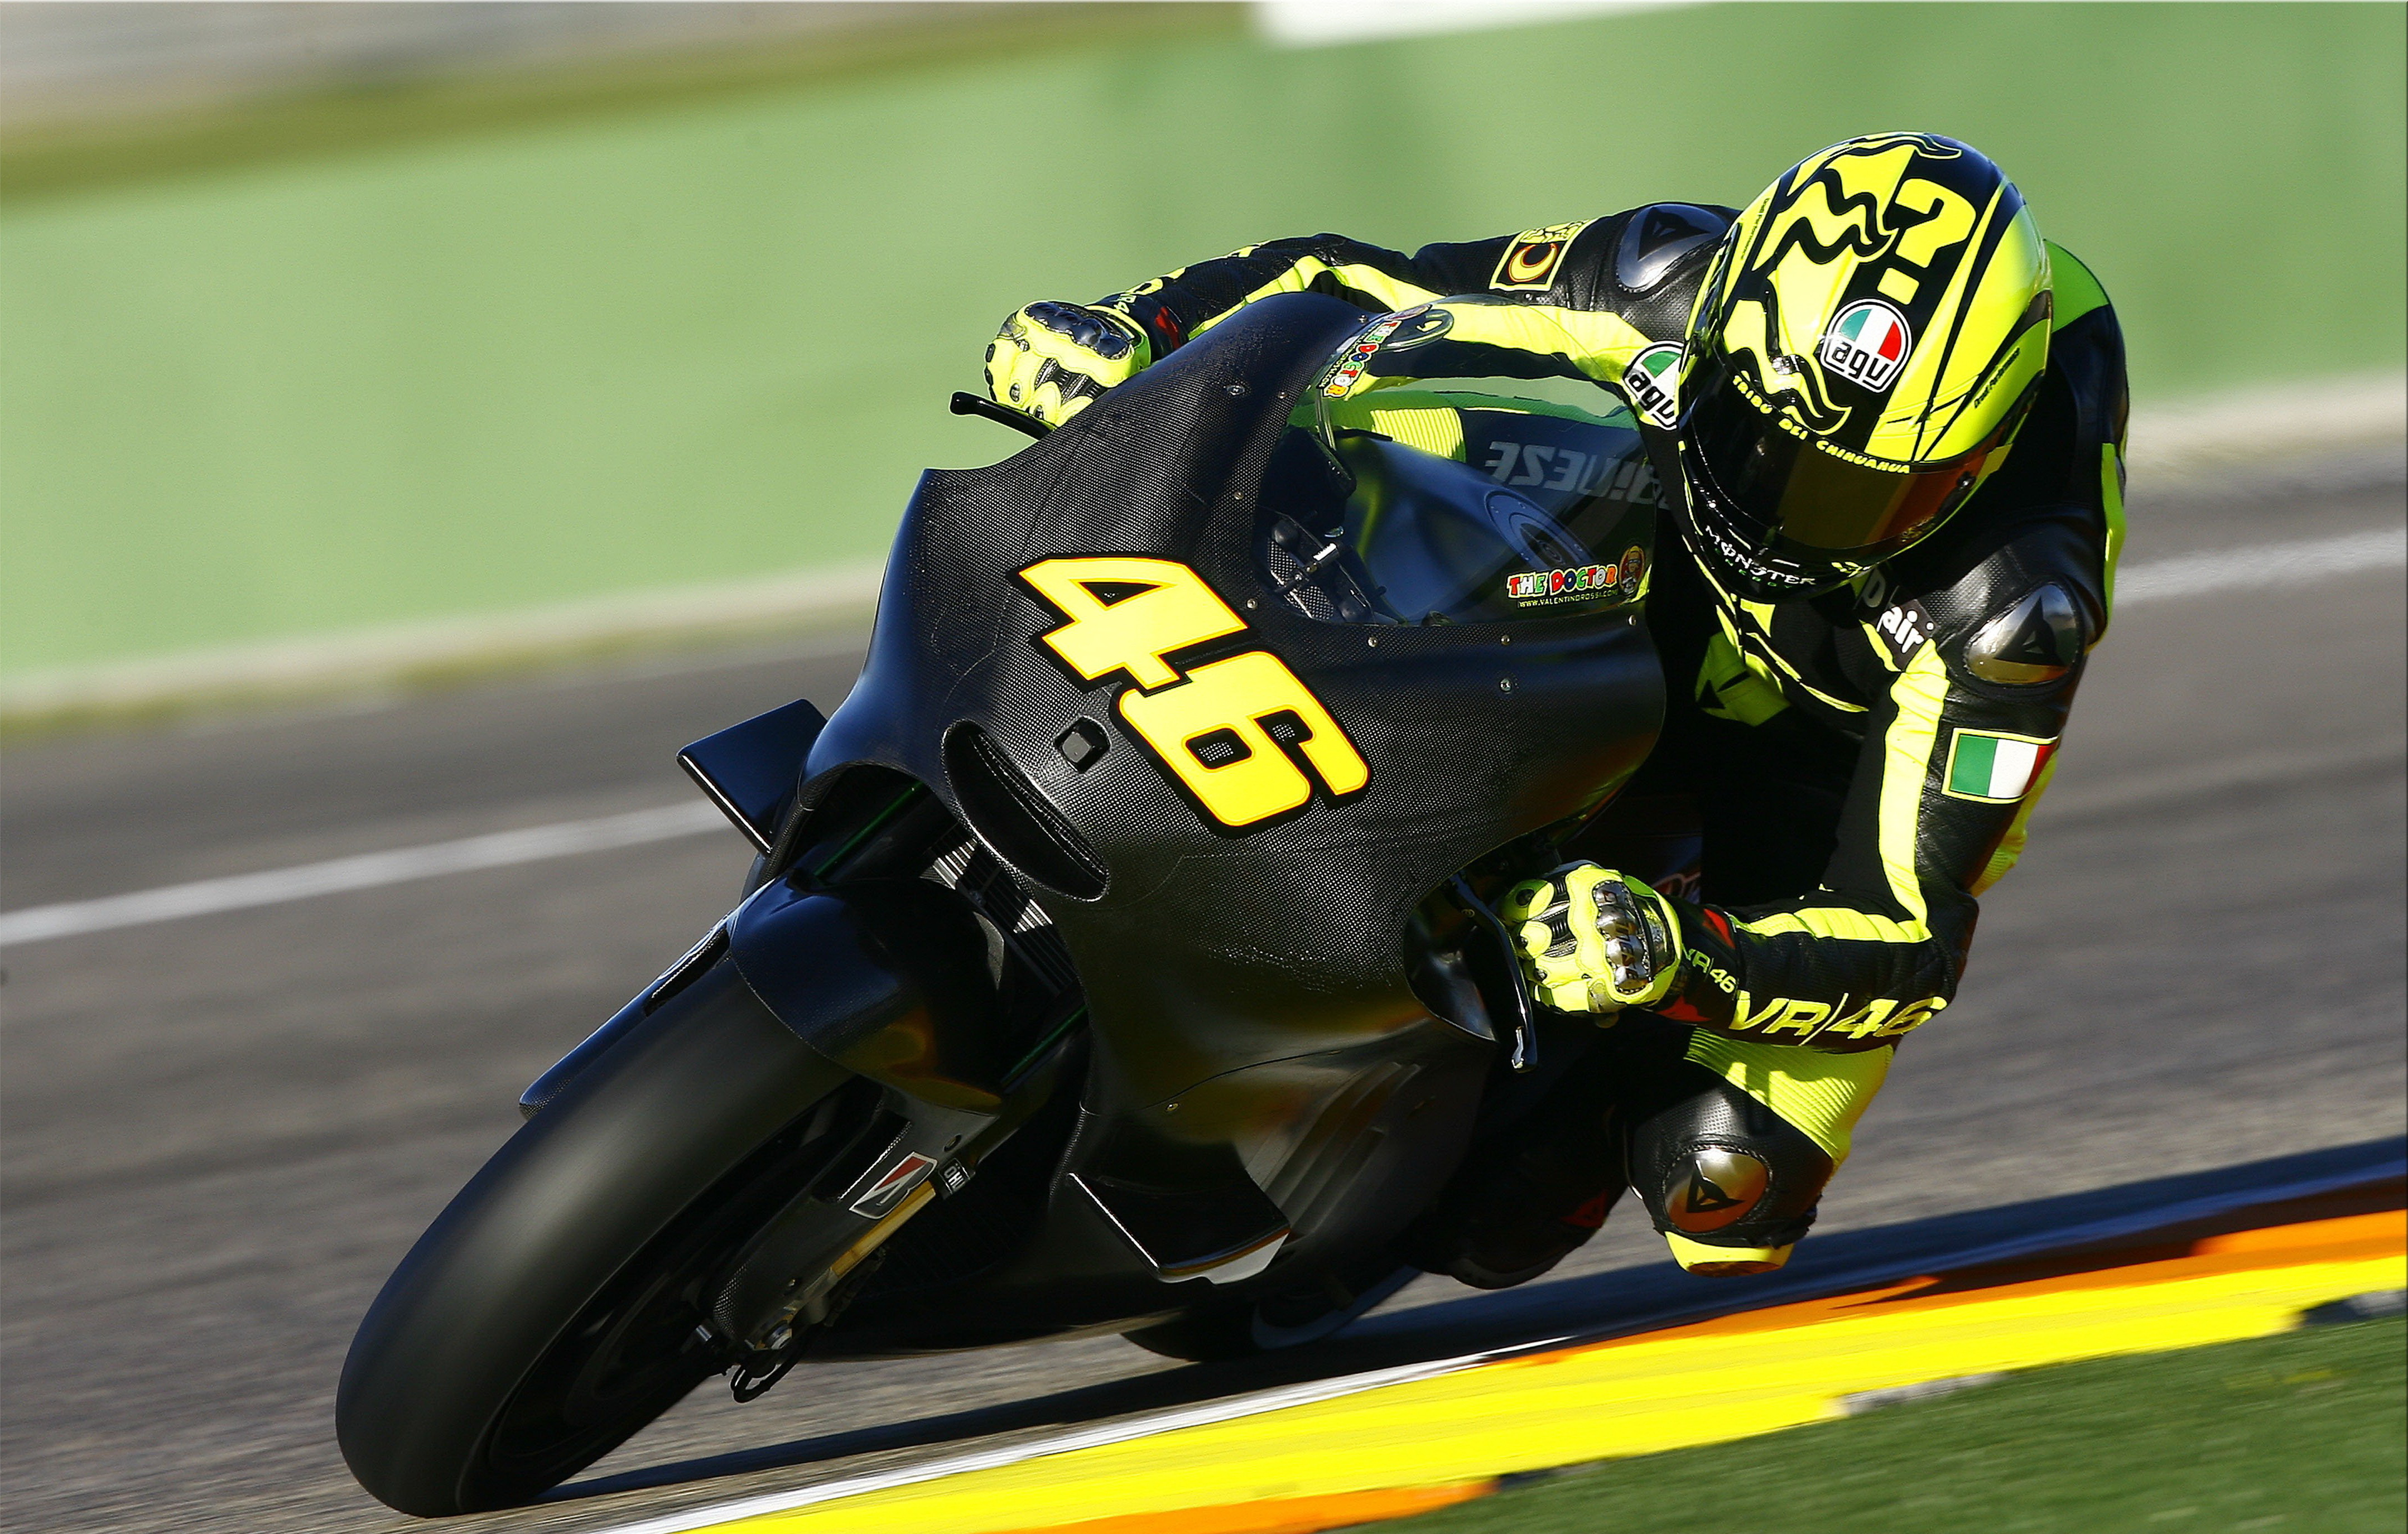 1080p Motorcycle Racing Hd Images